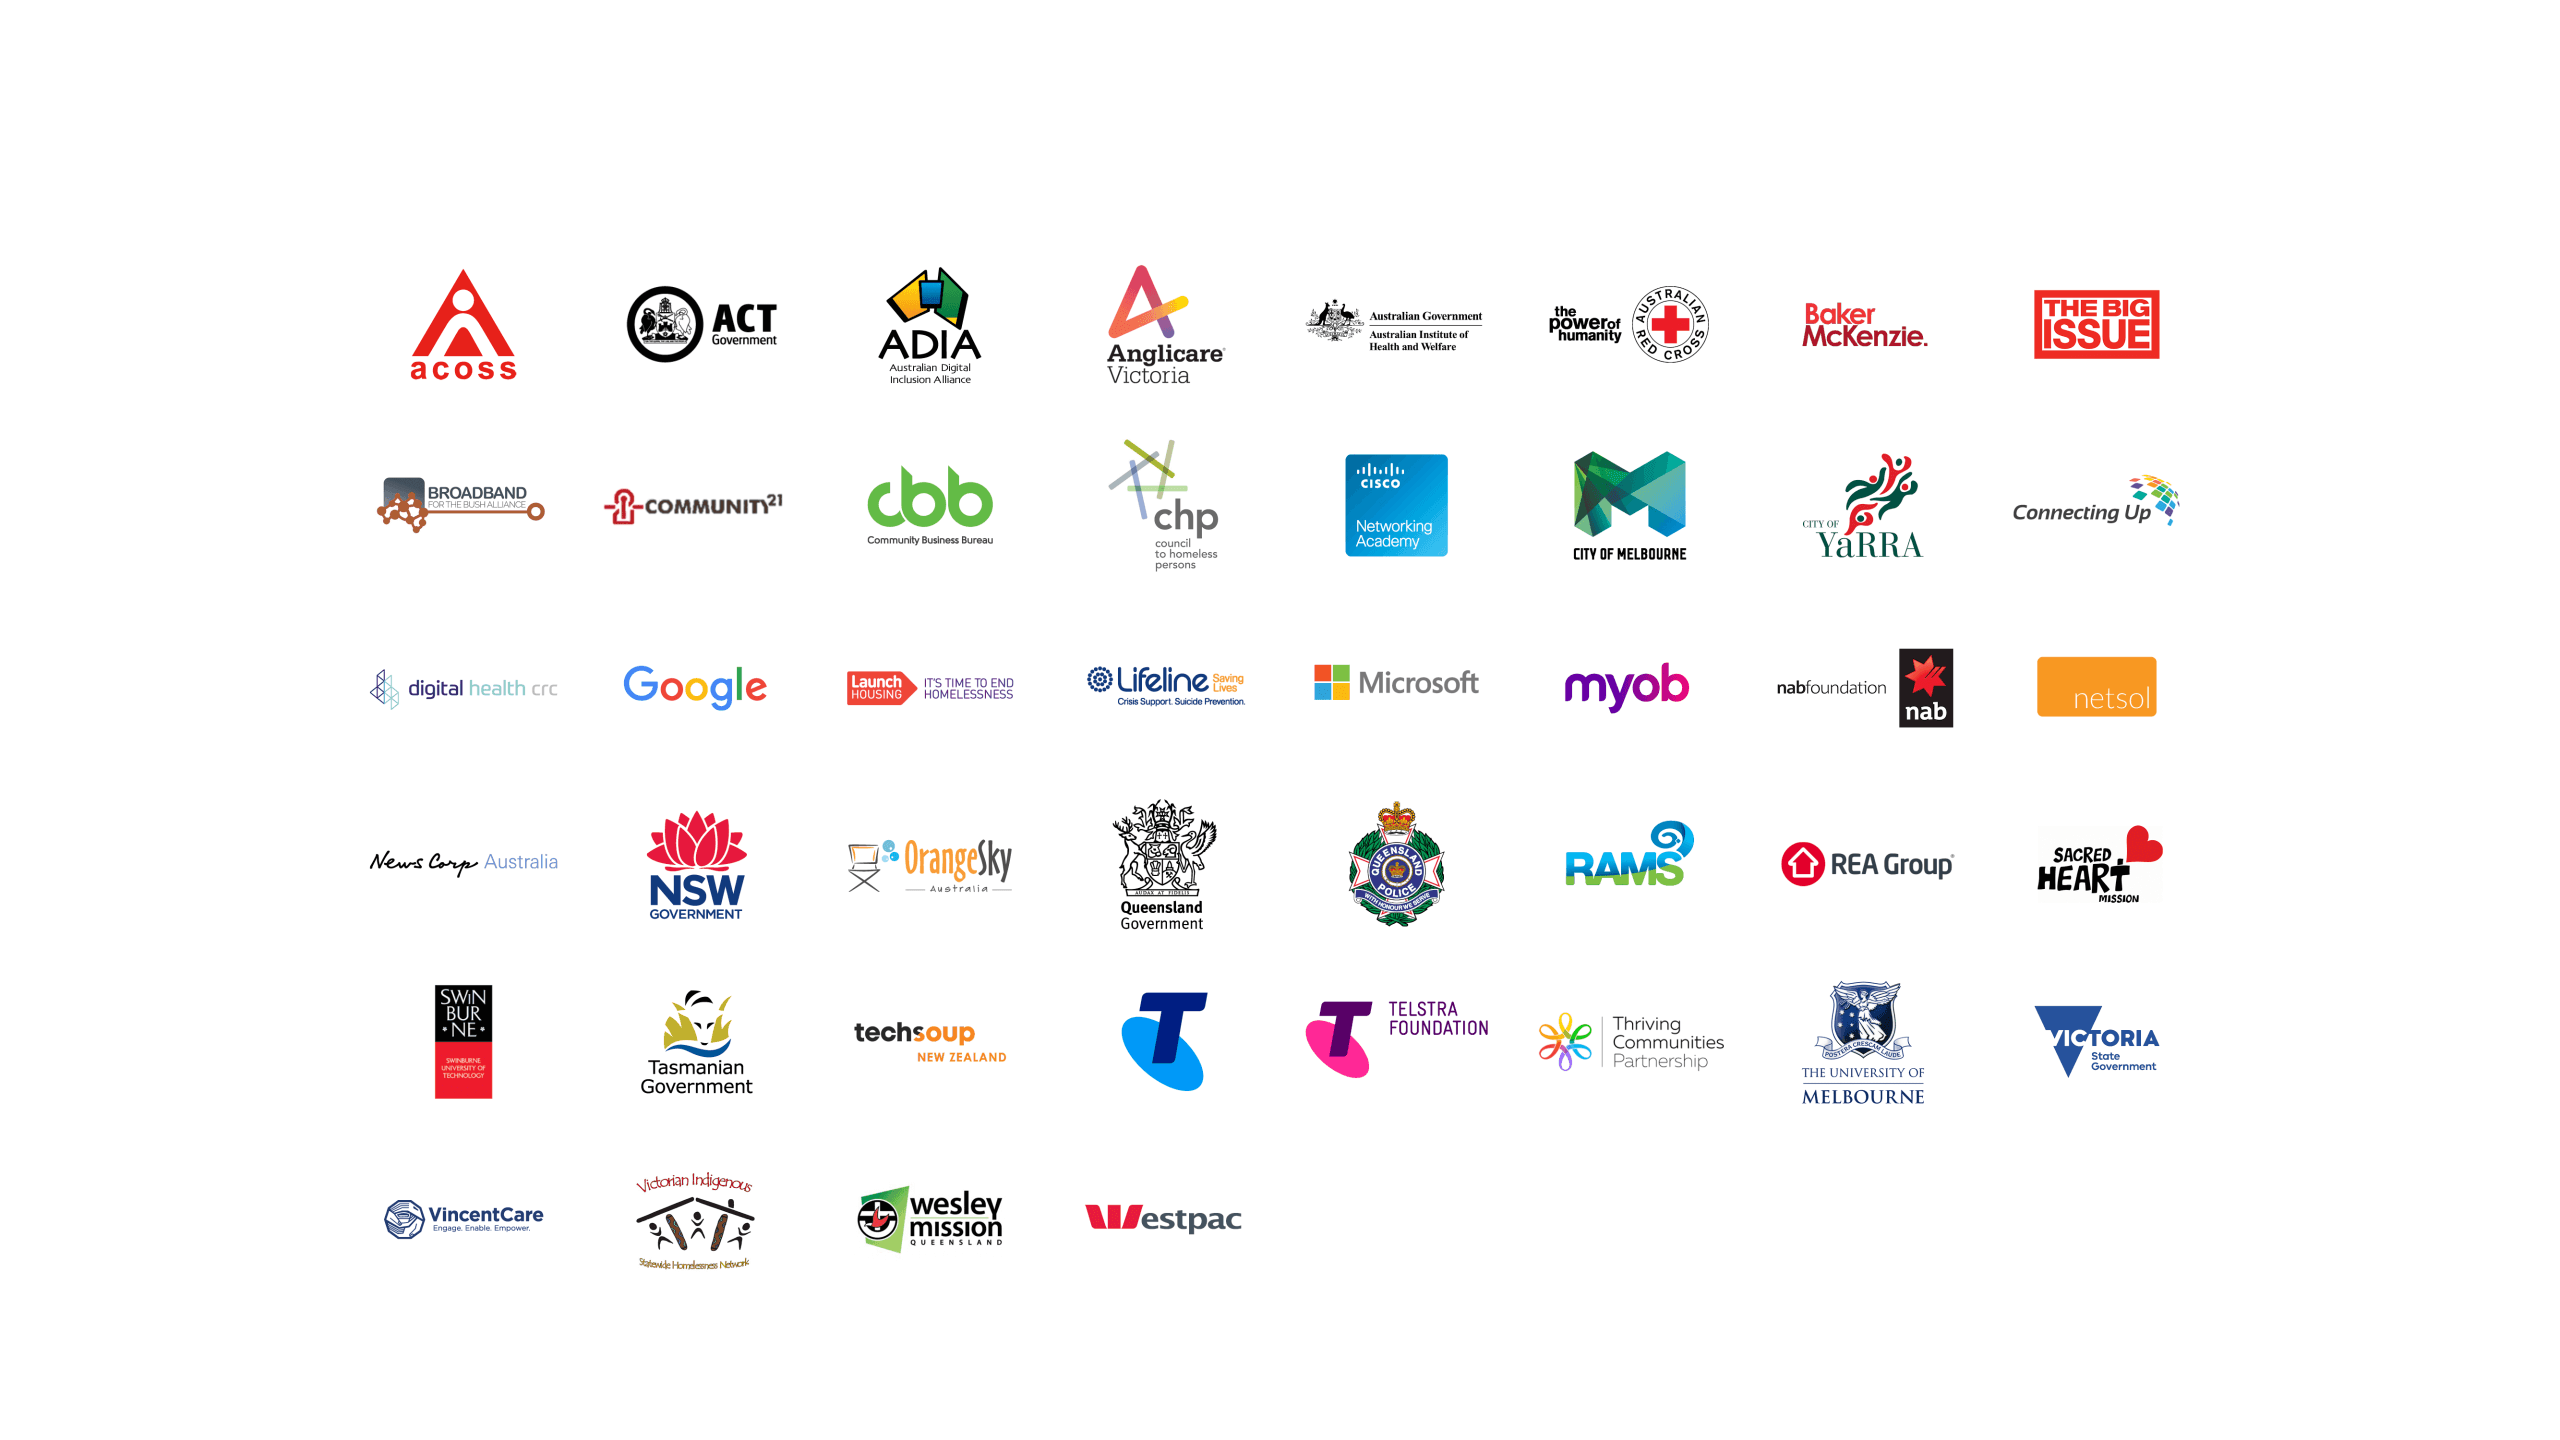 Our partners and supporters